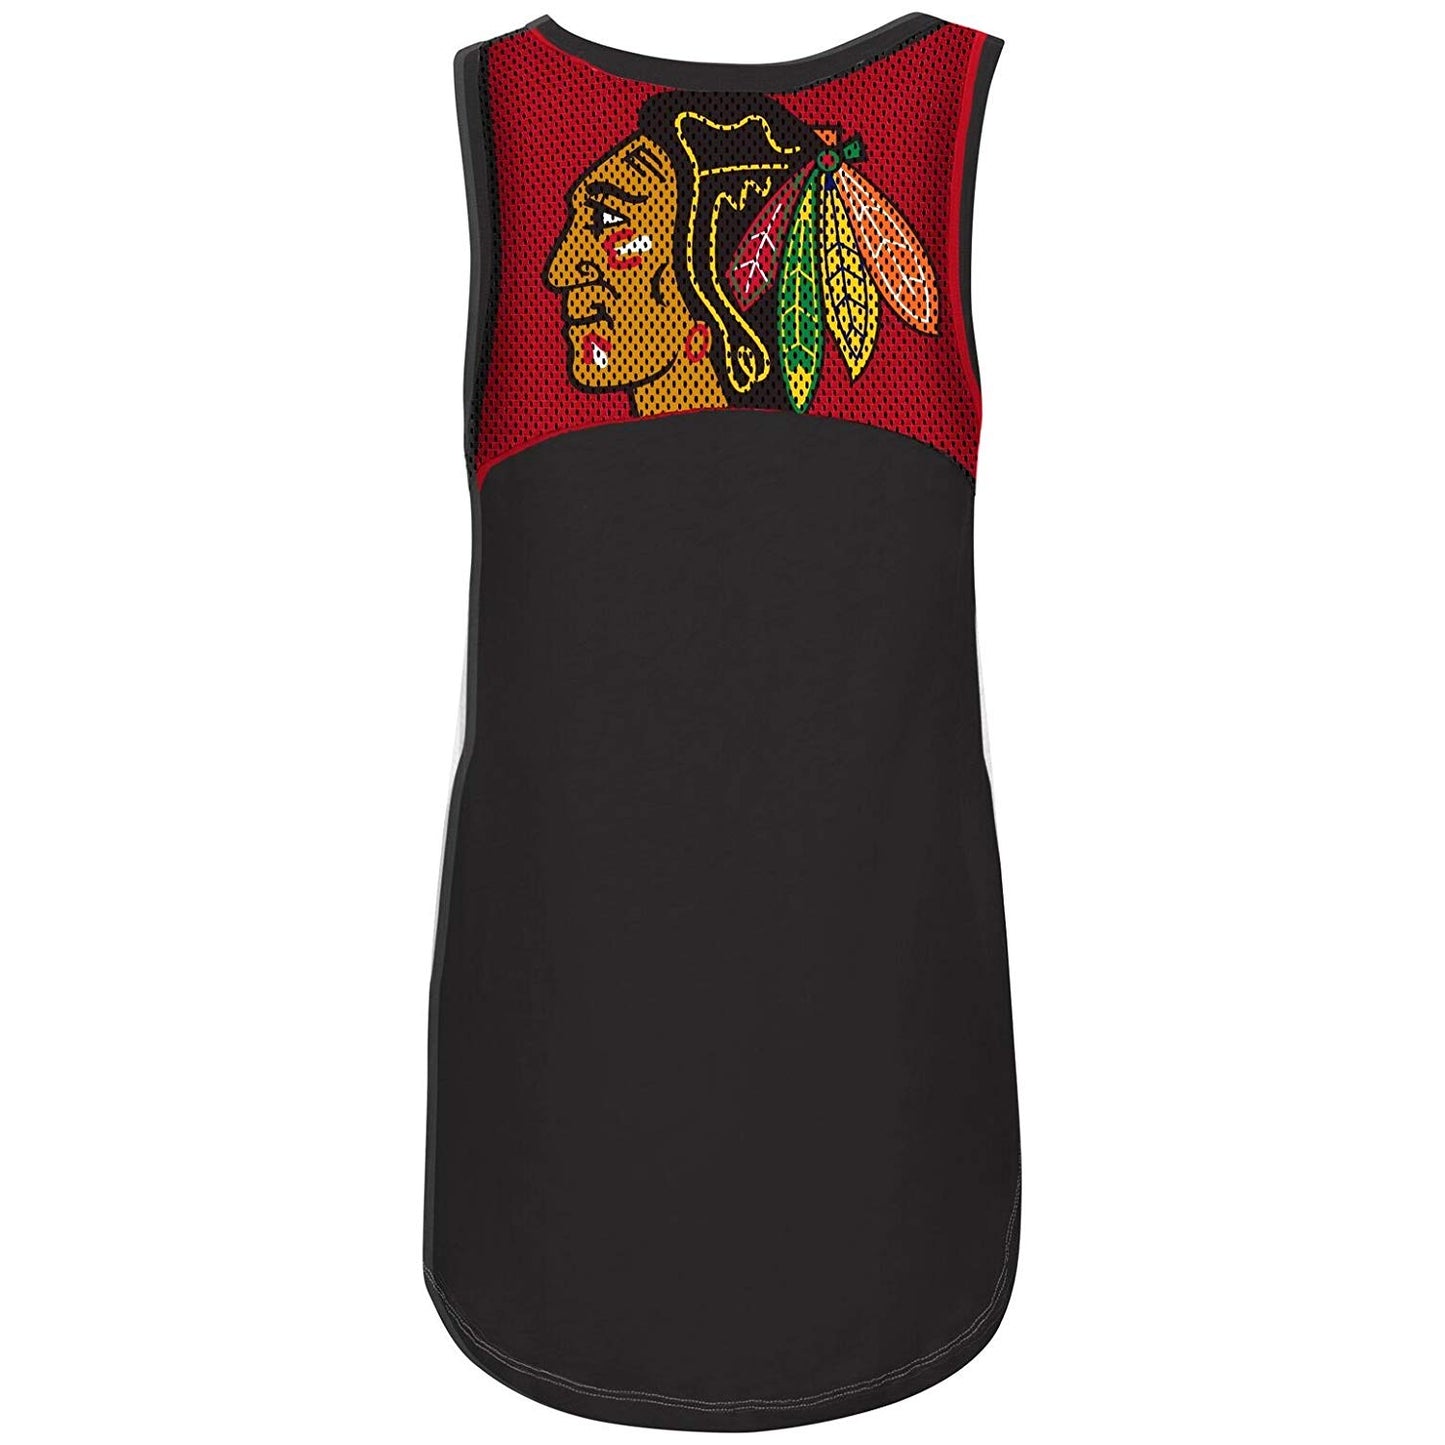 Women's Chicago Blackhawks In the Stands Mesh Back Tank Top